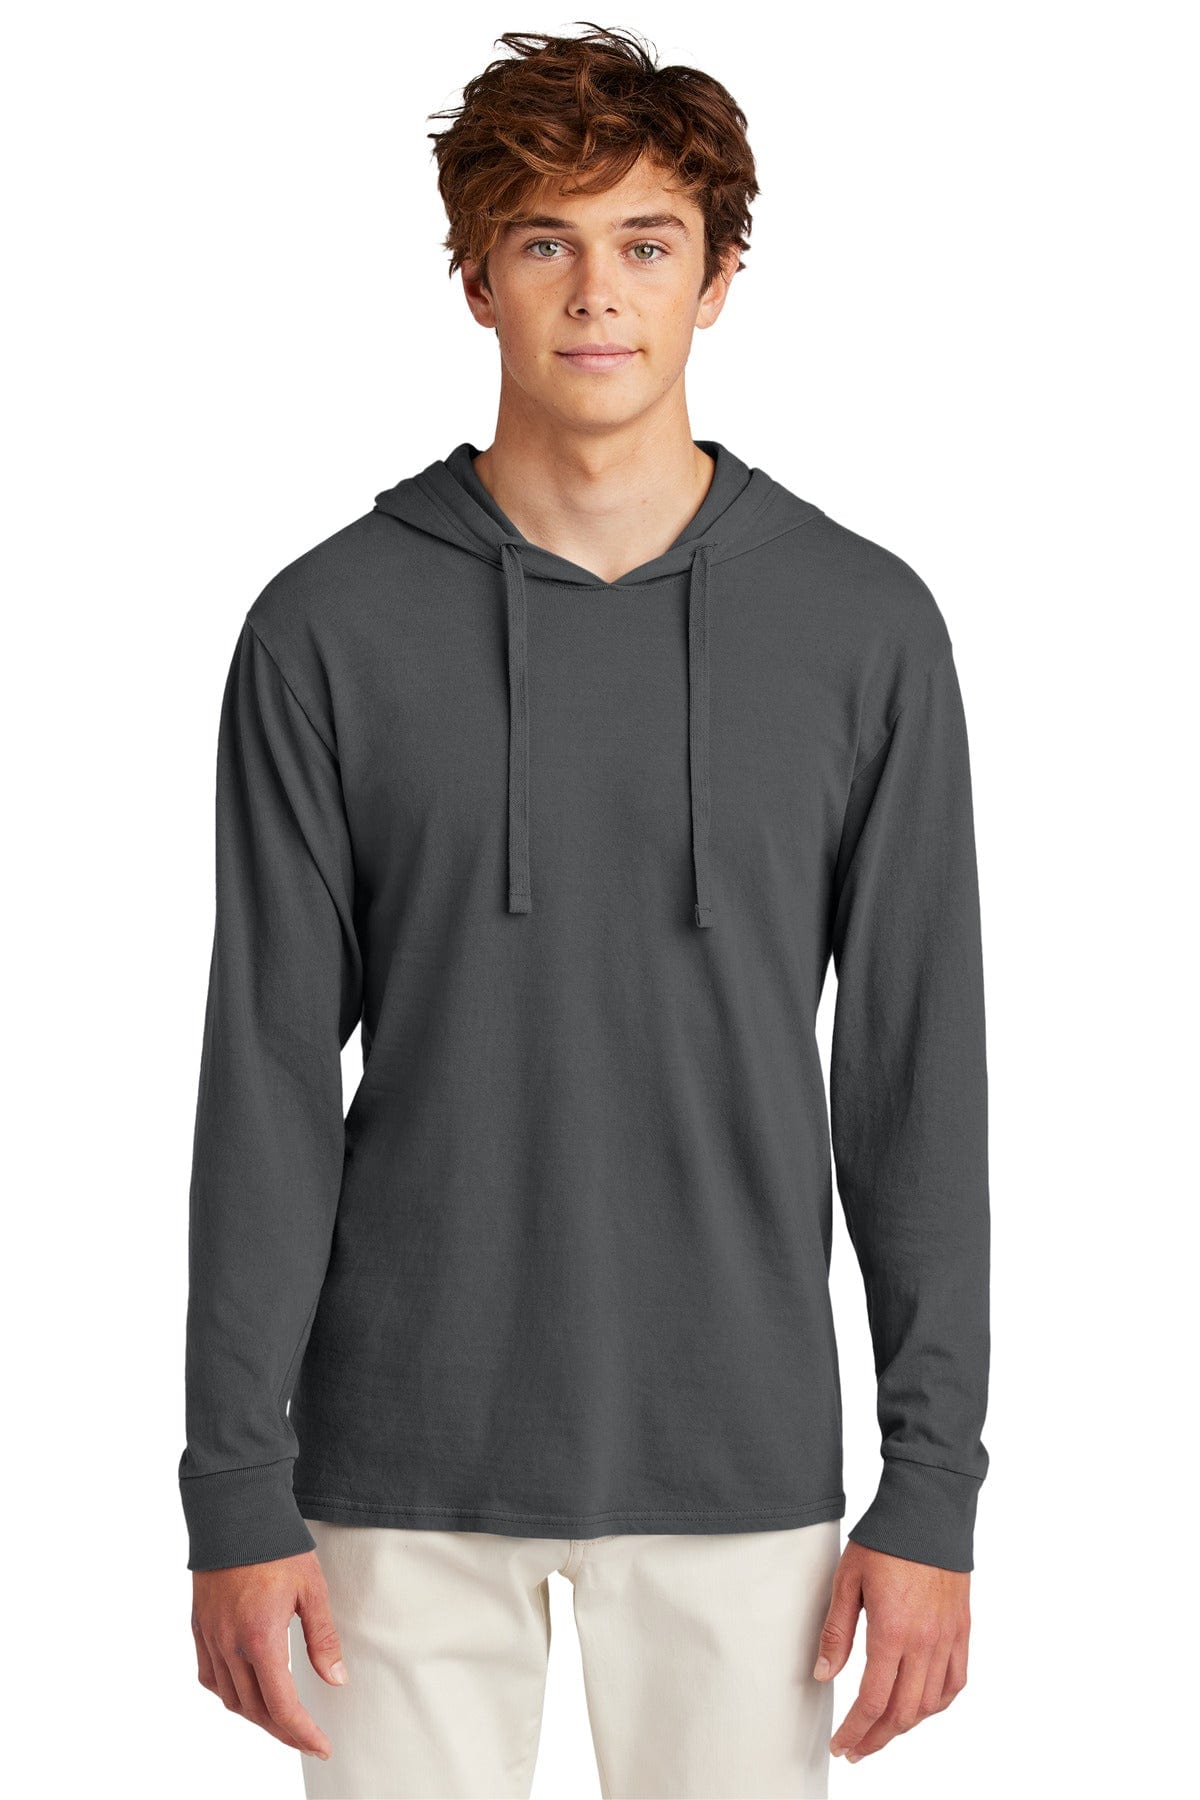 Port & Company PC099H: Beach Wash Garment-Dyed Pullover Hooded Tee